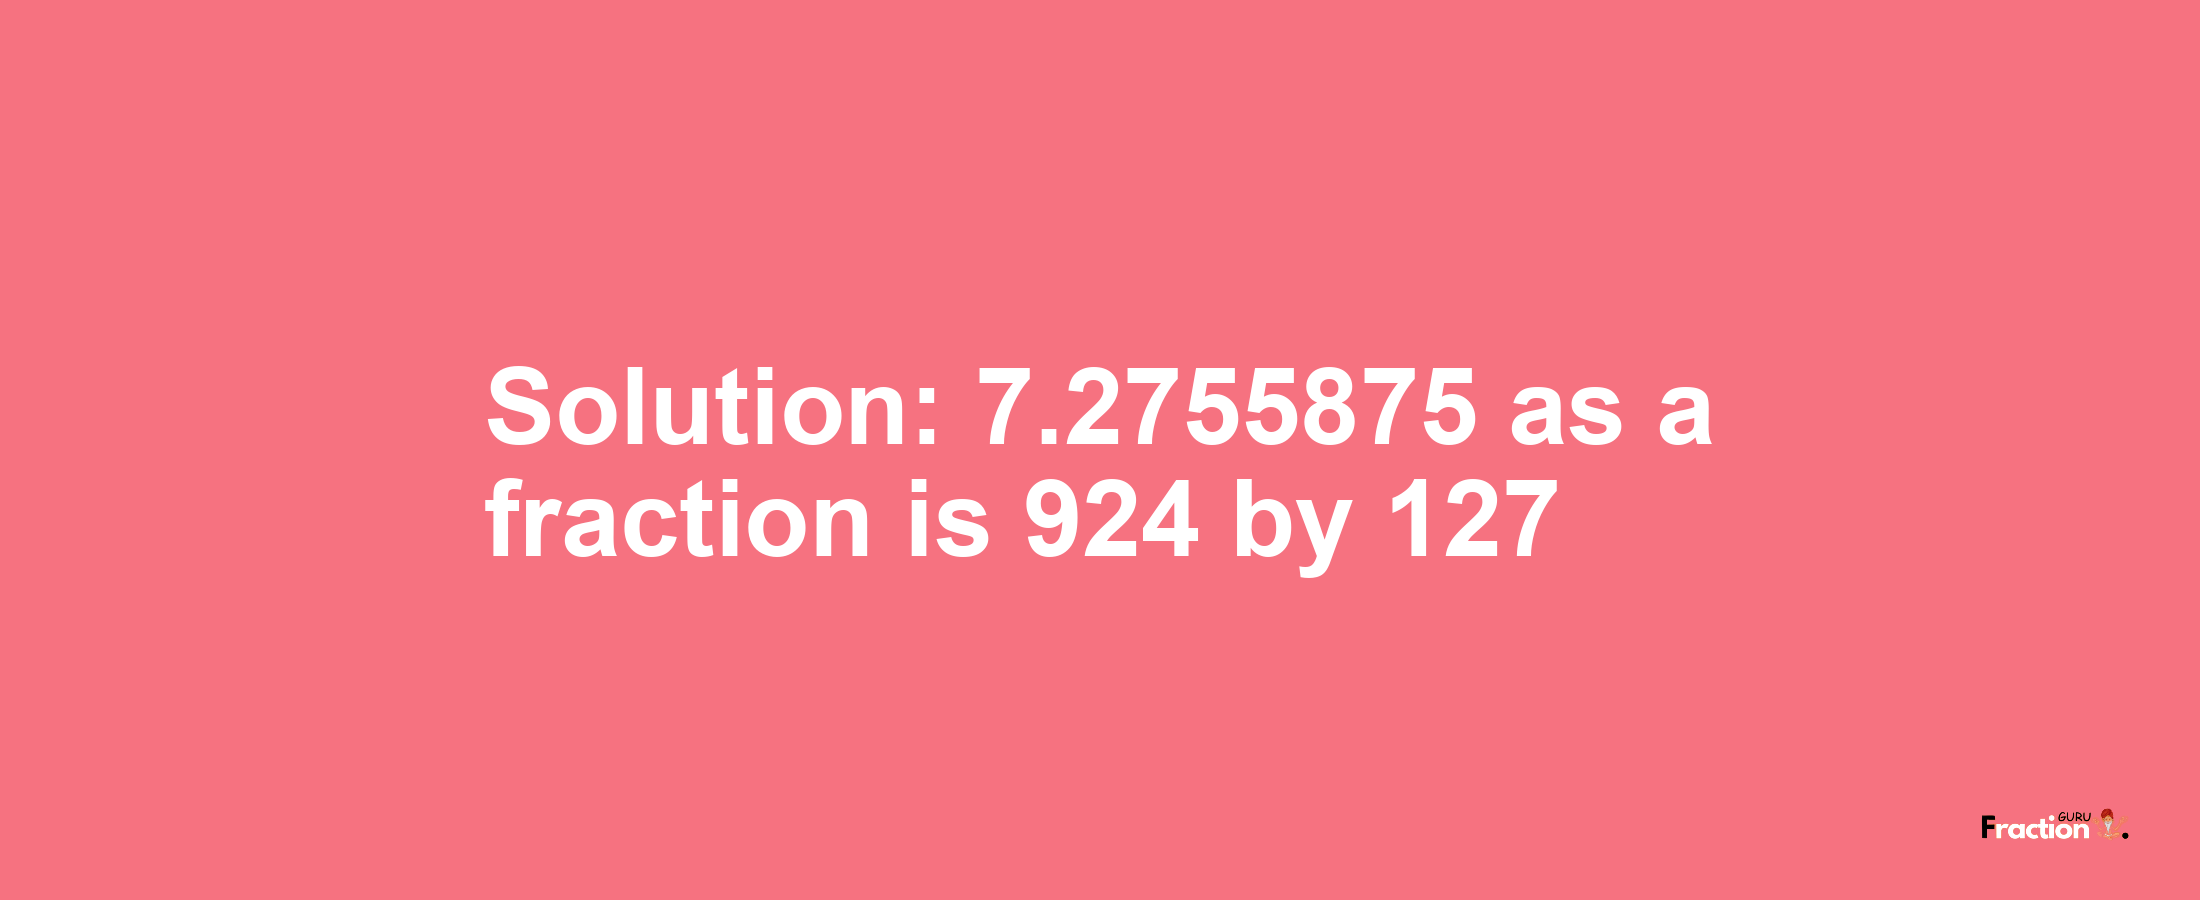 Solution:7.2755875 as a fraction is 924/127